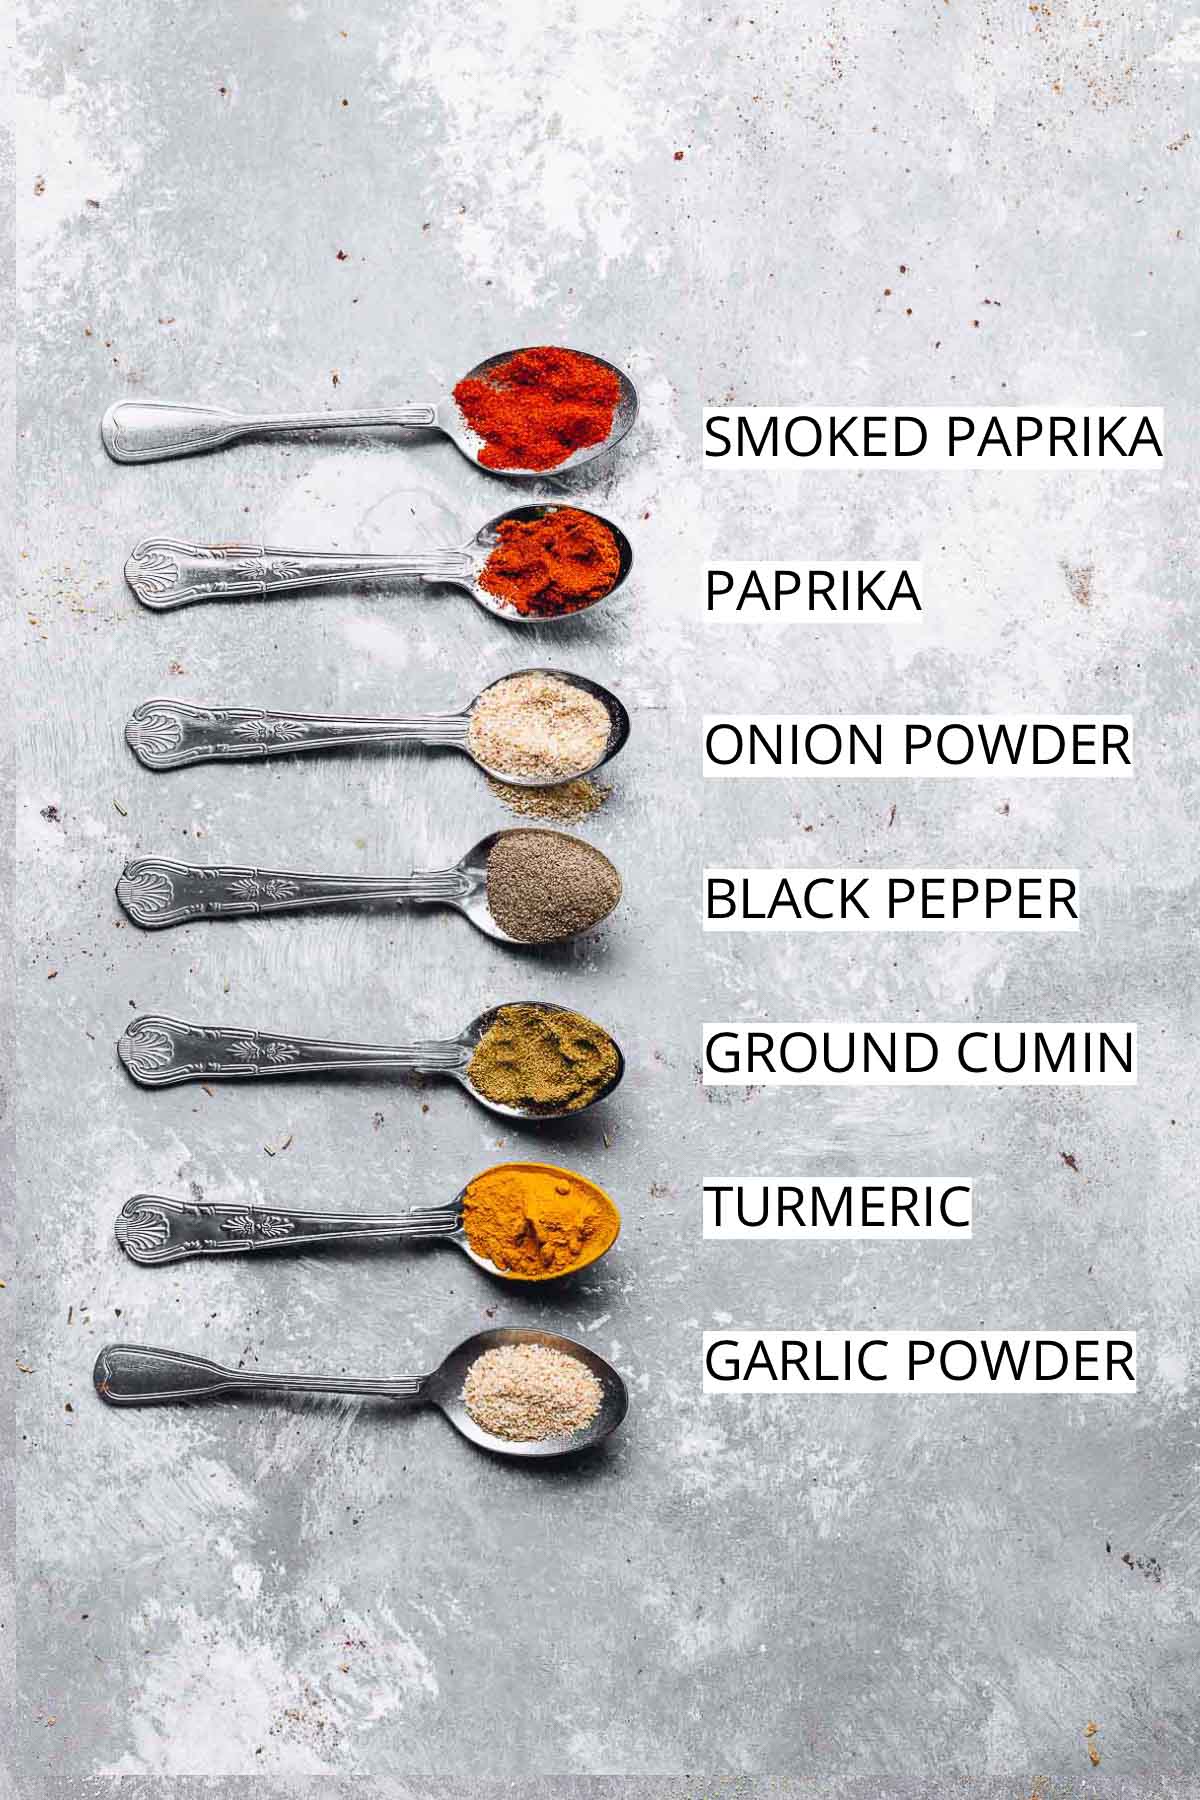 An overhead view of seven spoons containing various spices placed on a flat background.